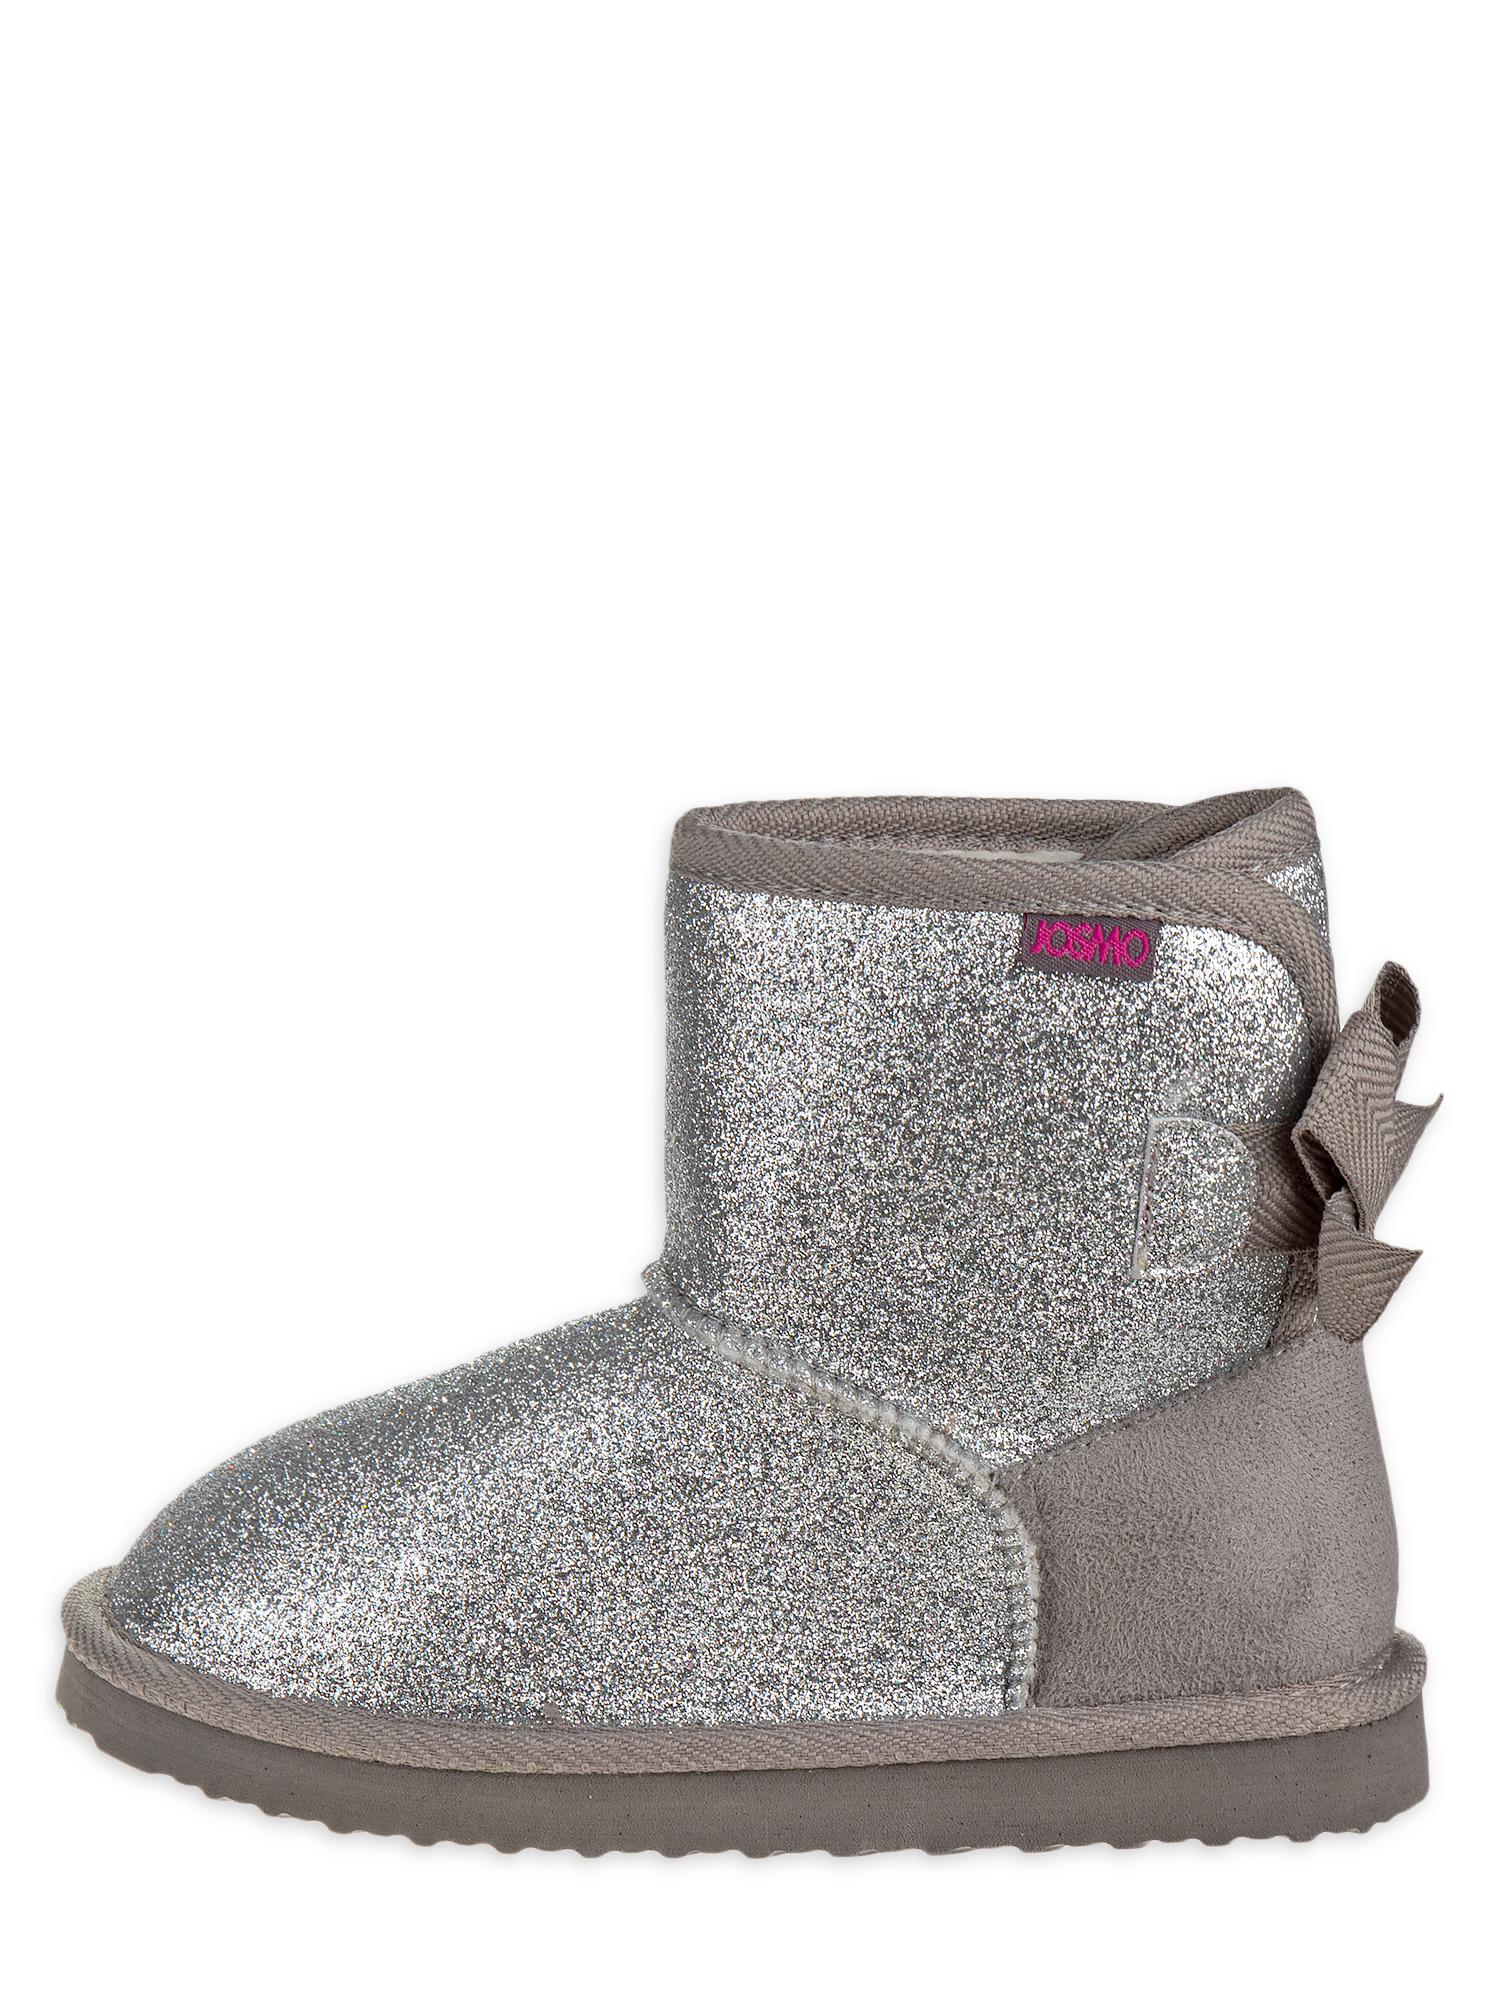 Josmo Glitter & Bows Faux Shearling Ankle Boot (Toddler Girls) - image 5 of 5